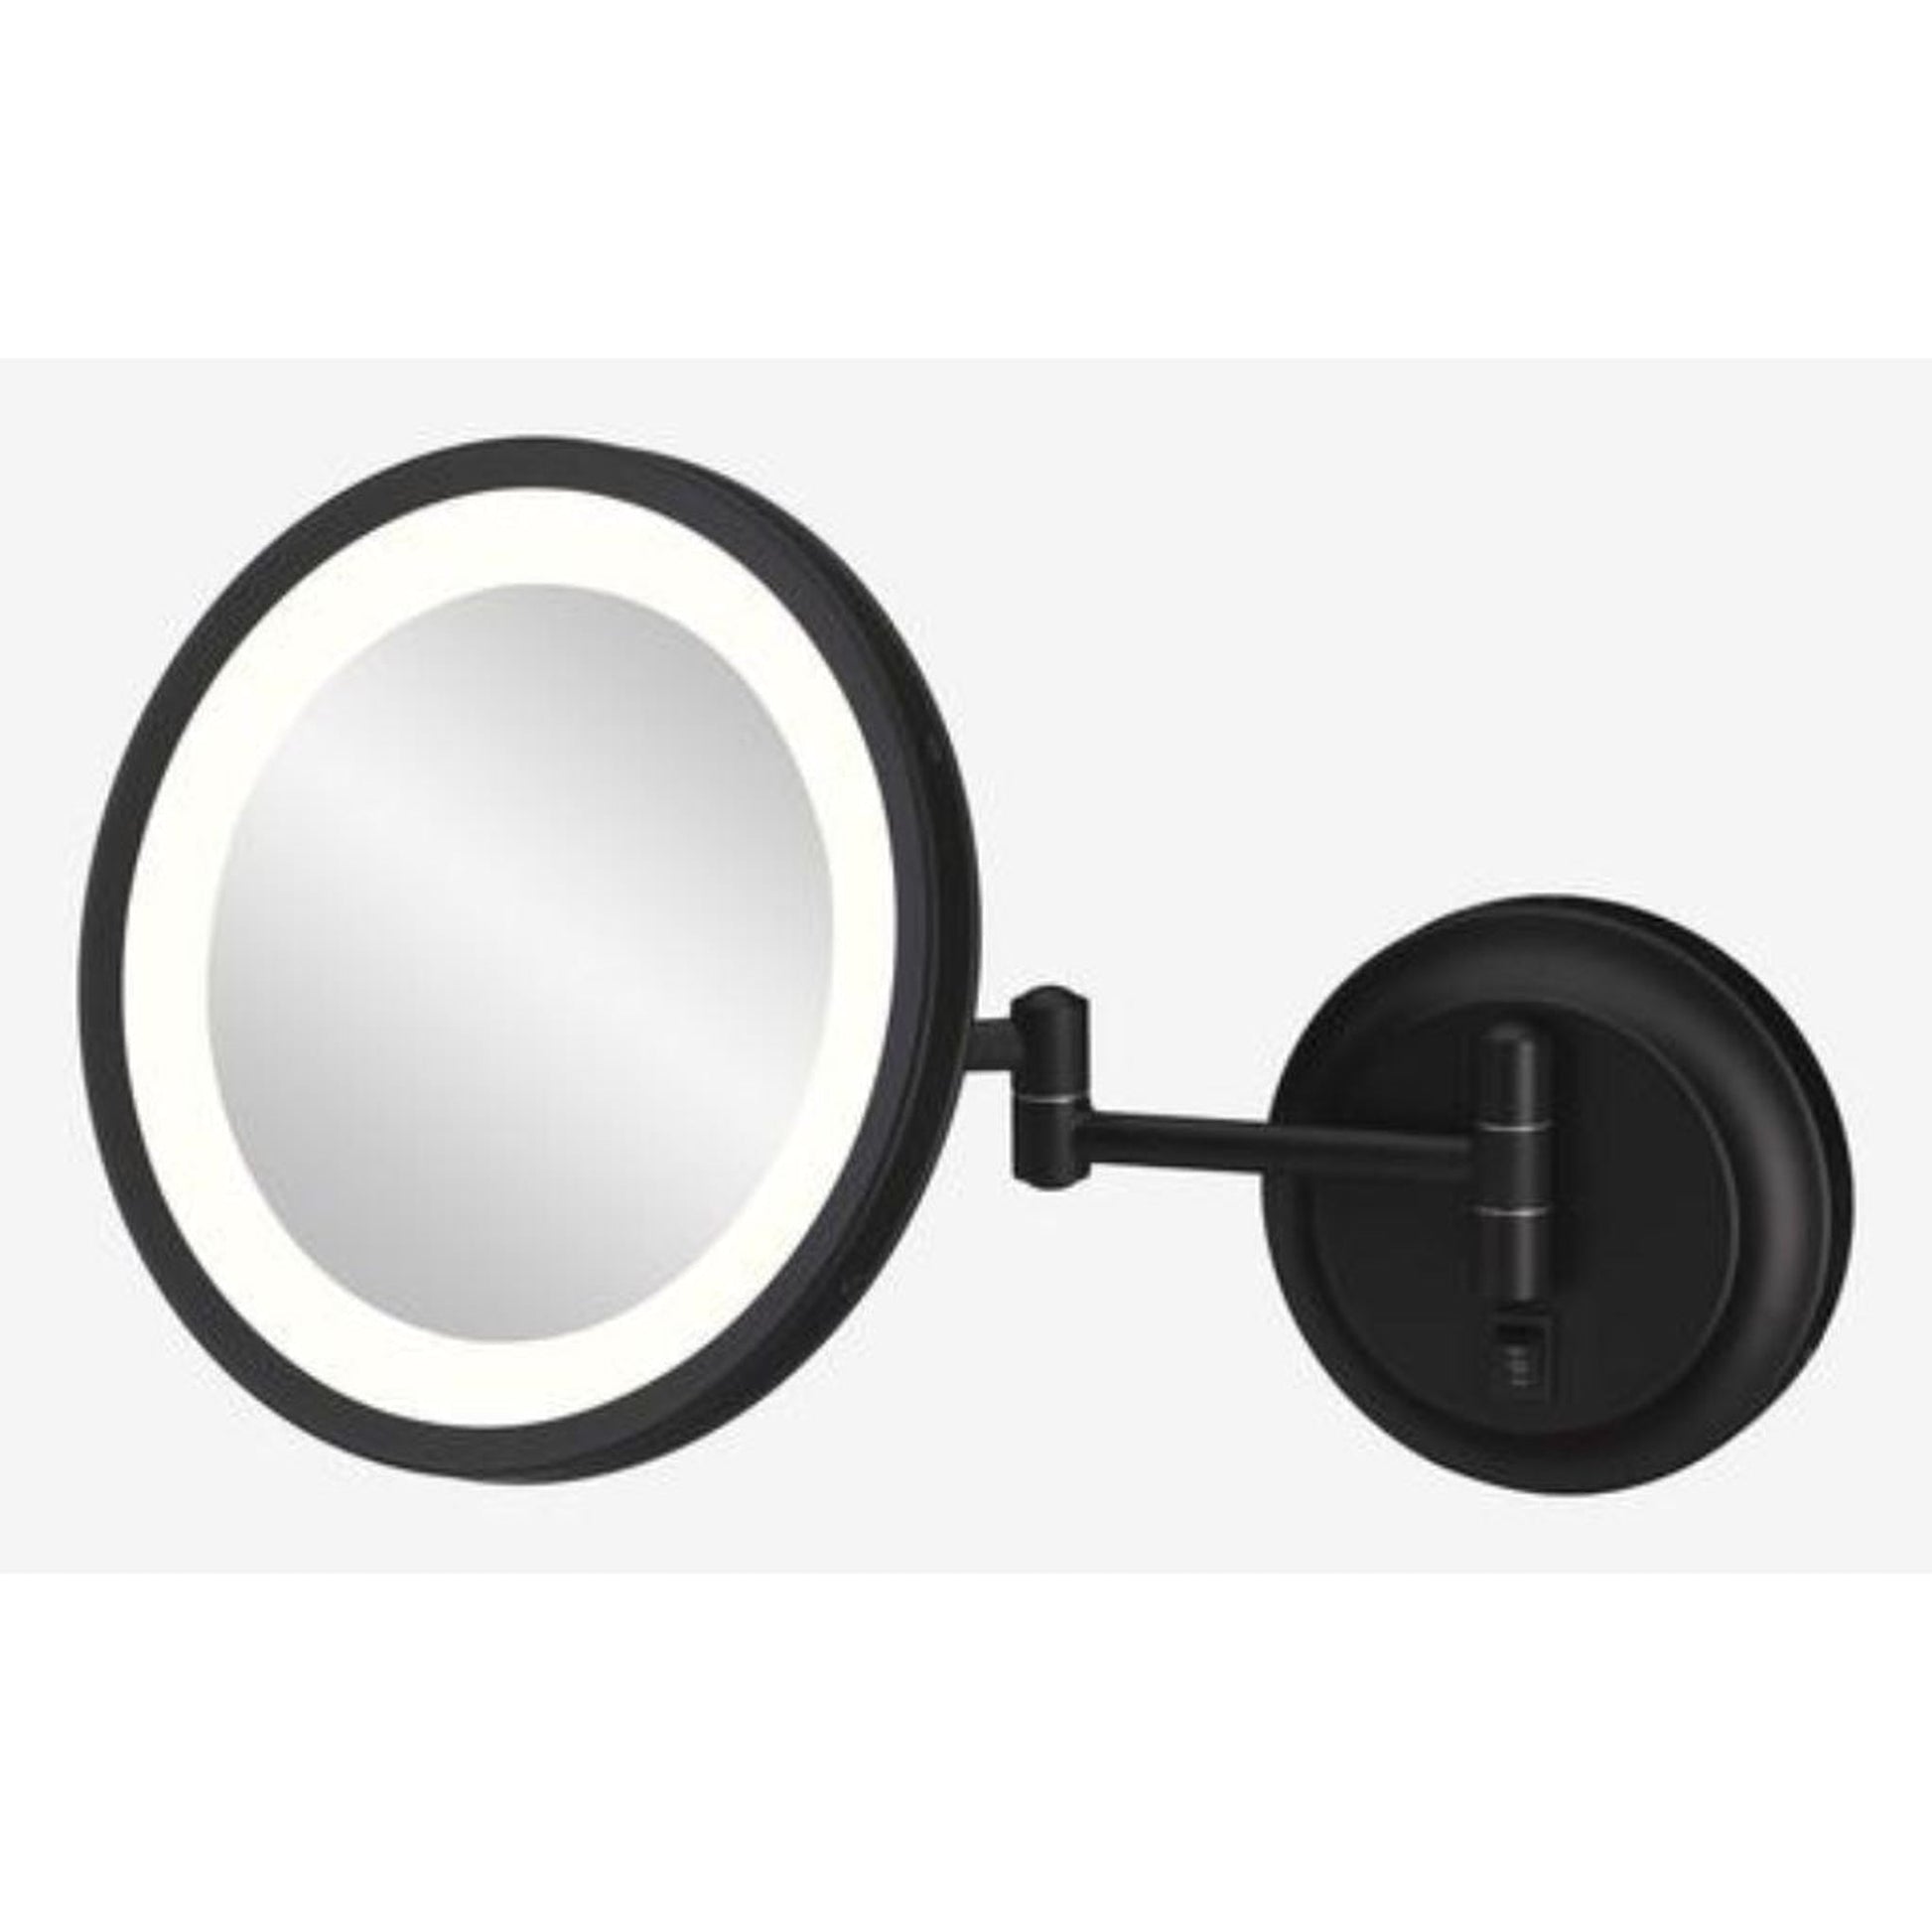 Aptations Kimball & Young 10" x 10" Matte Black Wall-Mounted Round Single Sided Hardwired 5X Magnified Makeup Mirror With Switchable 3,500K Warm White and 5,500K Cool White LED Light Color